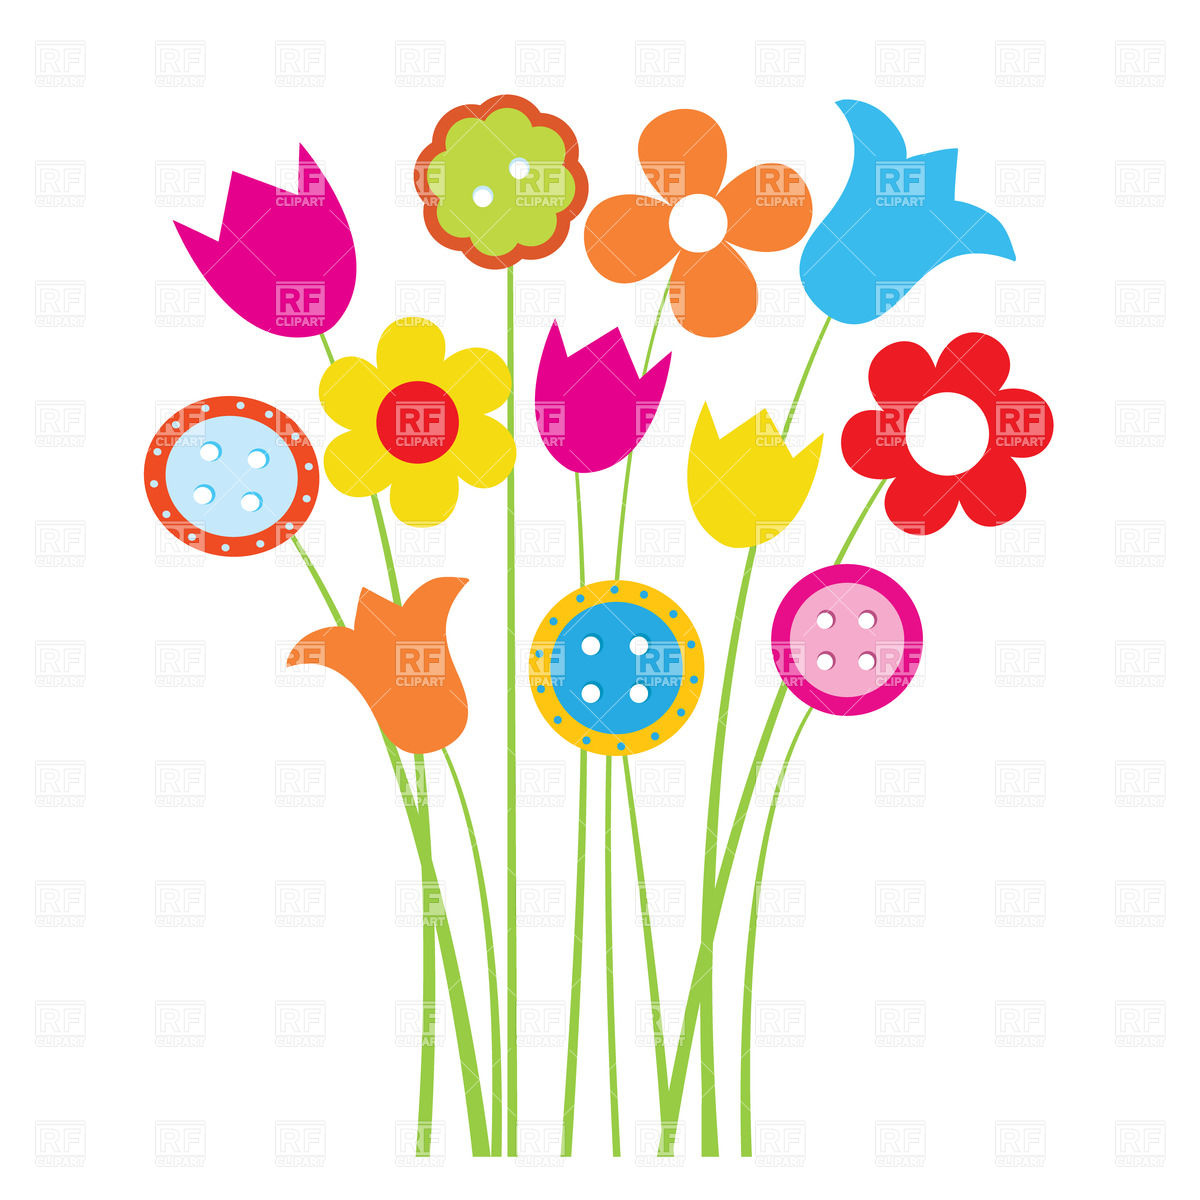 Colorful Cartoon Flowers 24175 Download Royalty Free Vector Clipart